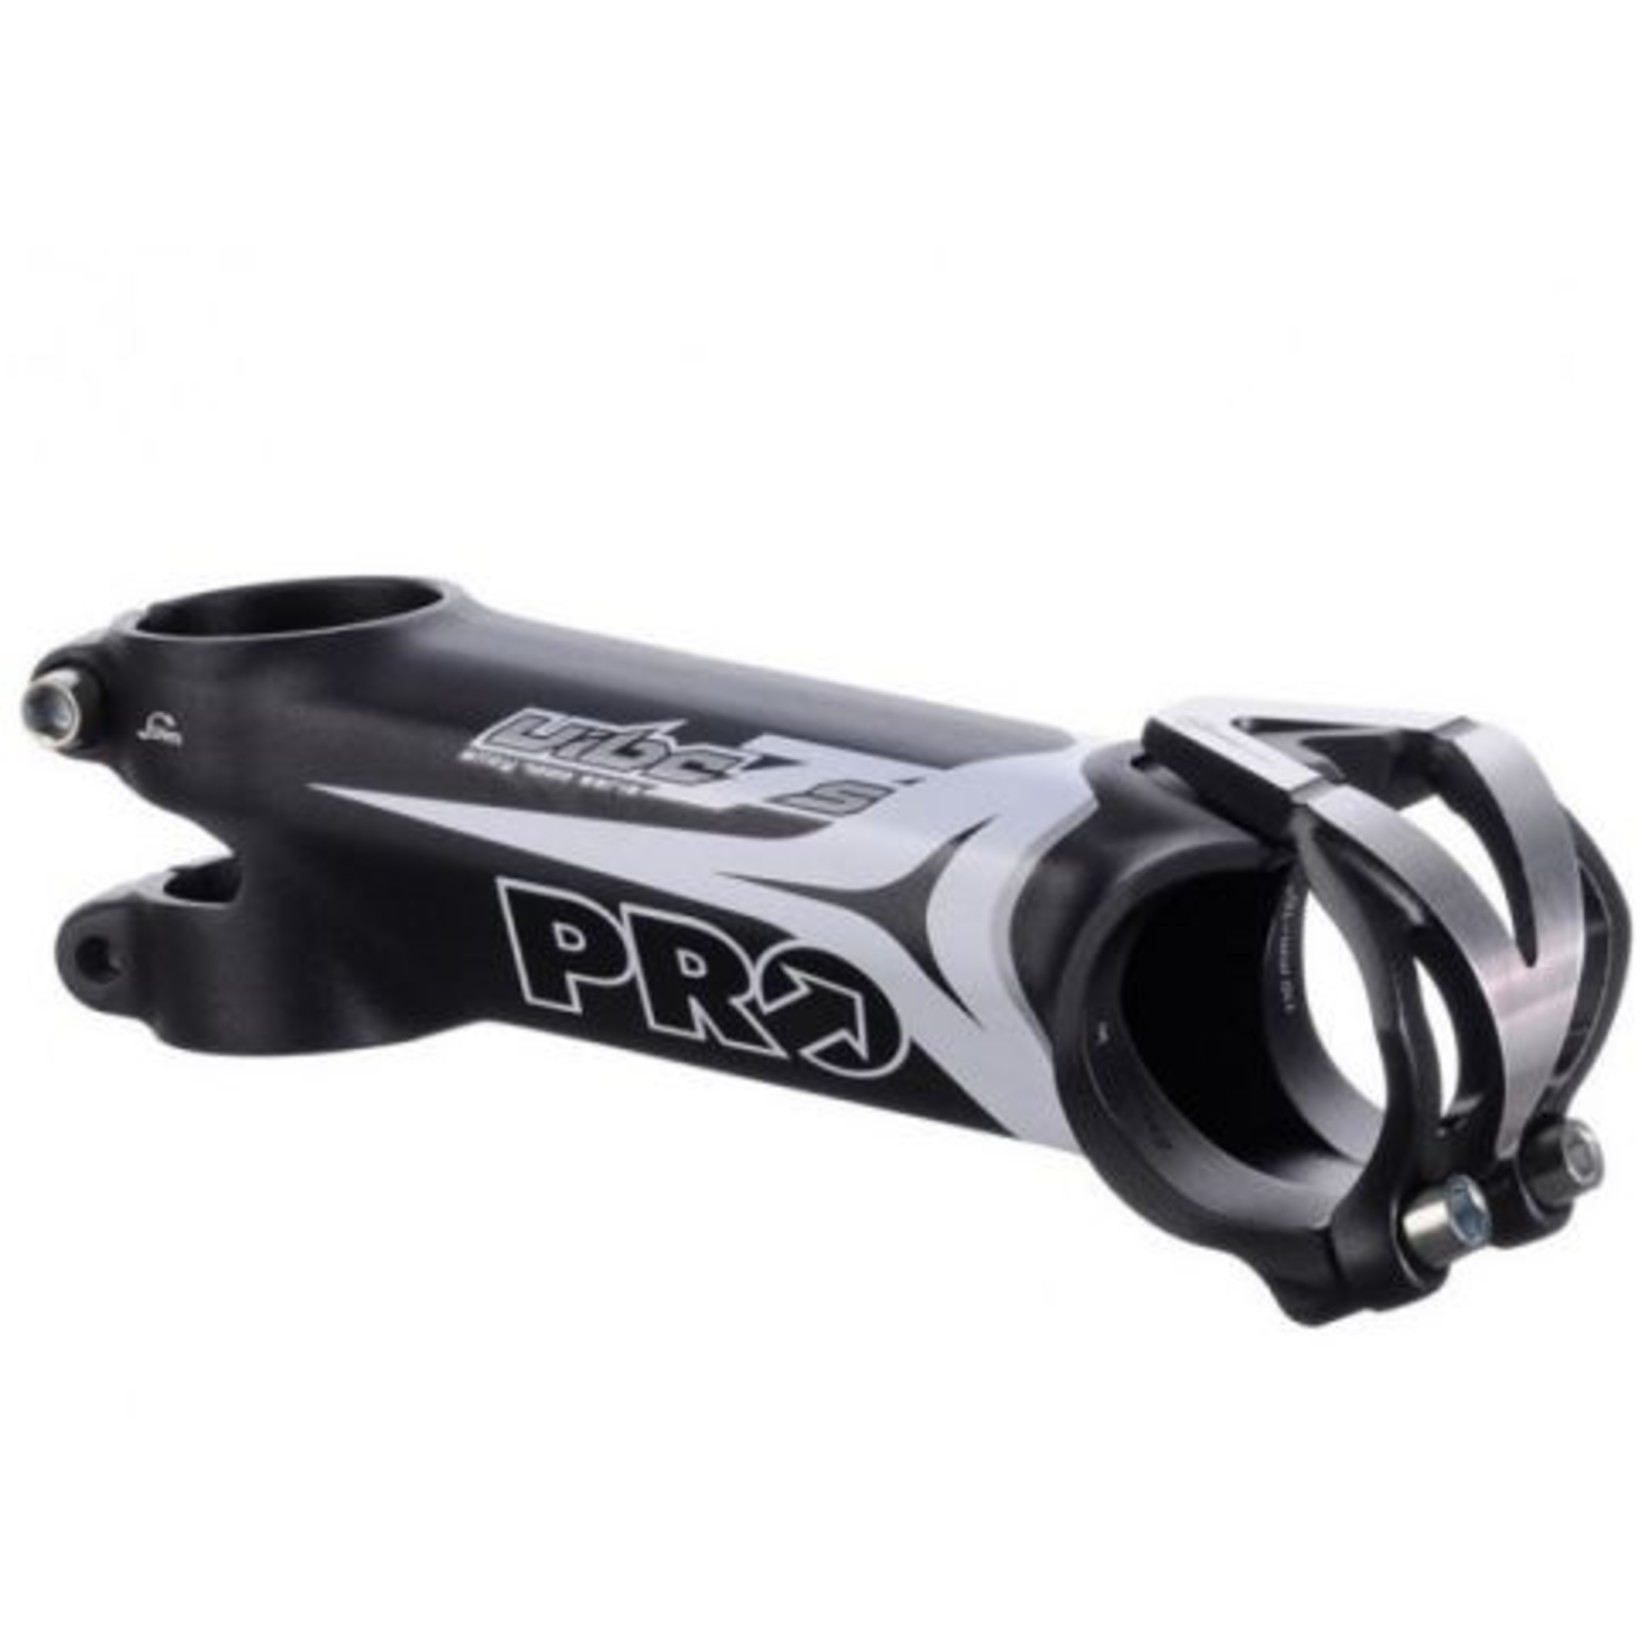 Shimano VIBE 7S STEM BLK 90MMM OS CLAMP, -10 DEGR, 44MM STACK